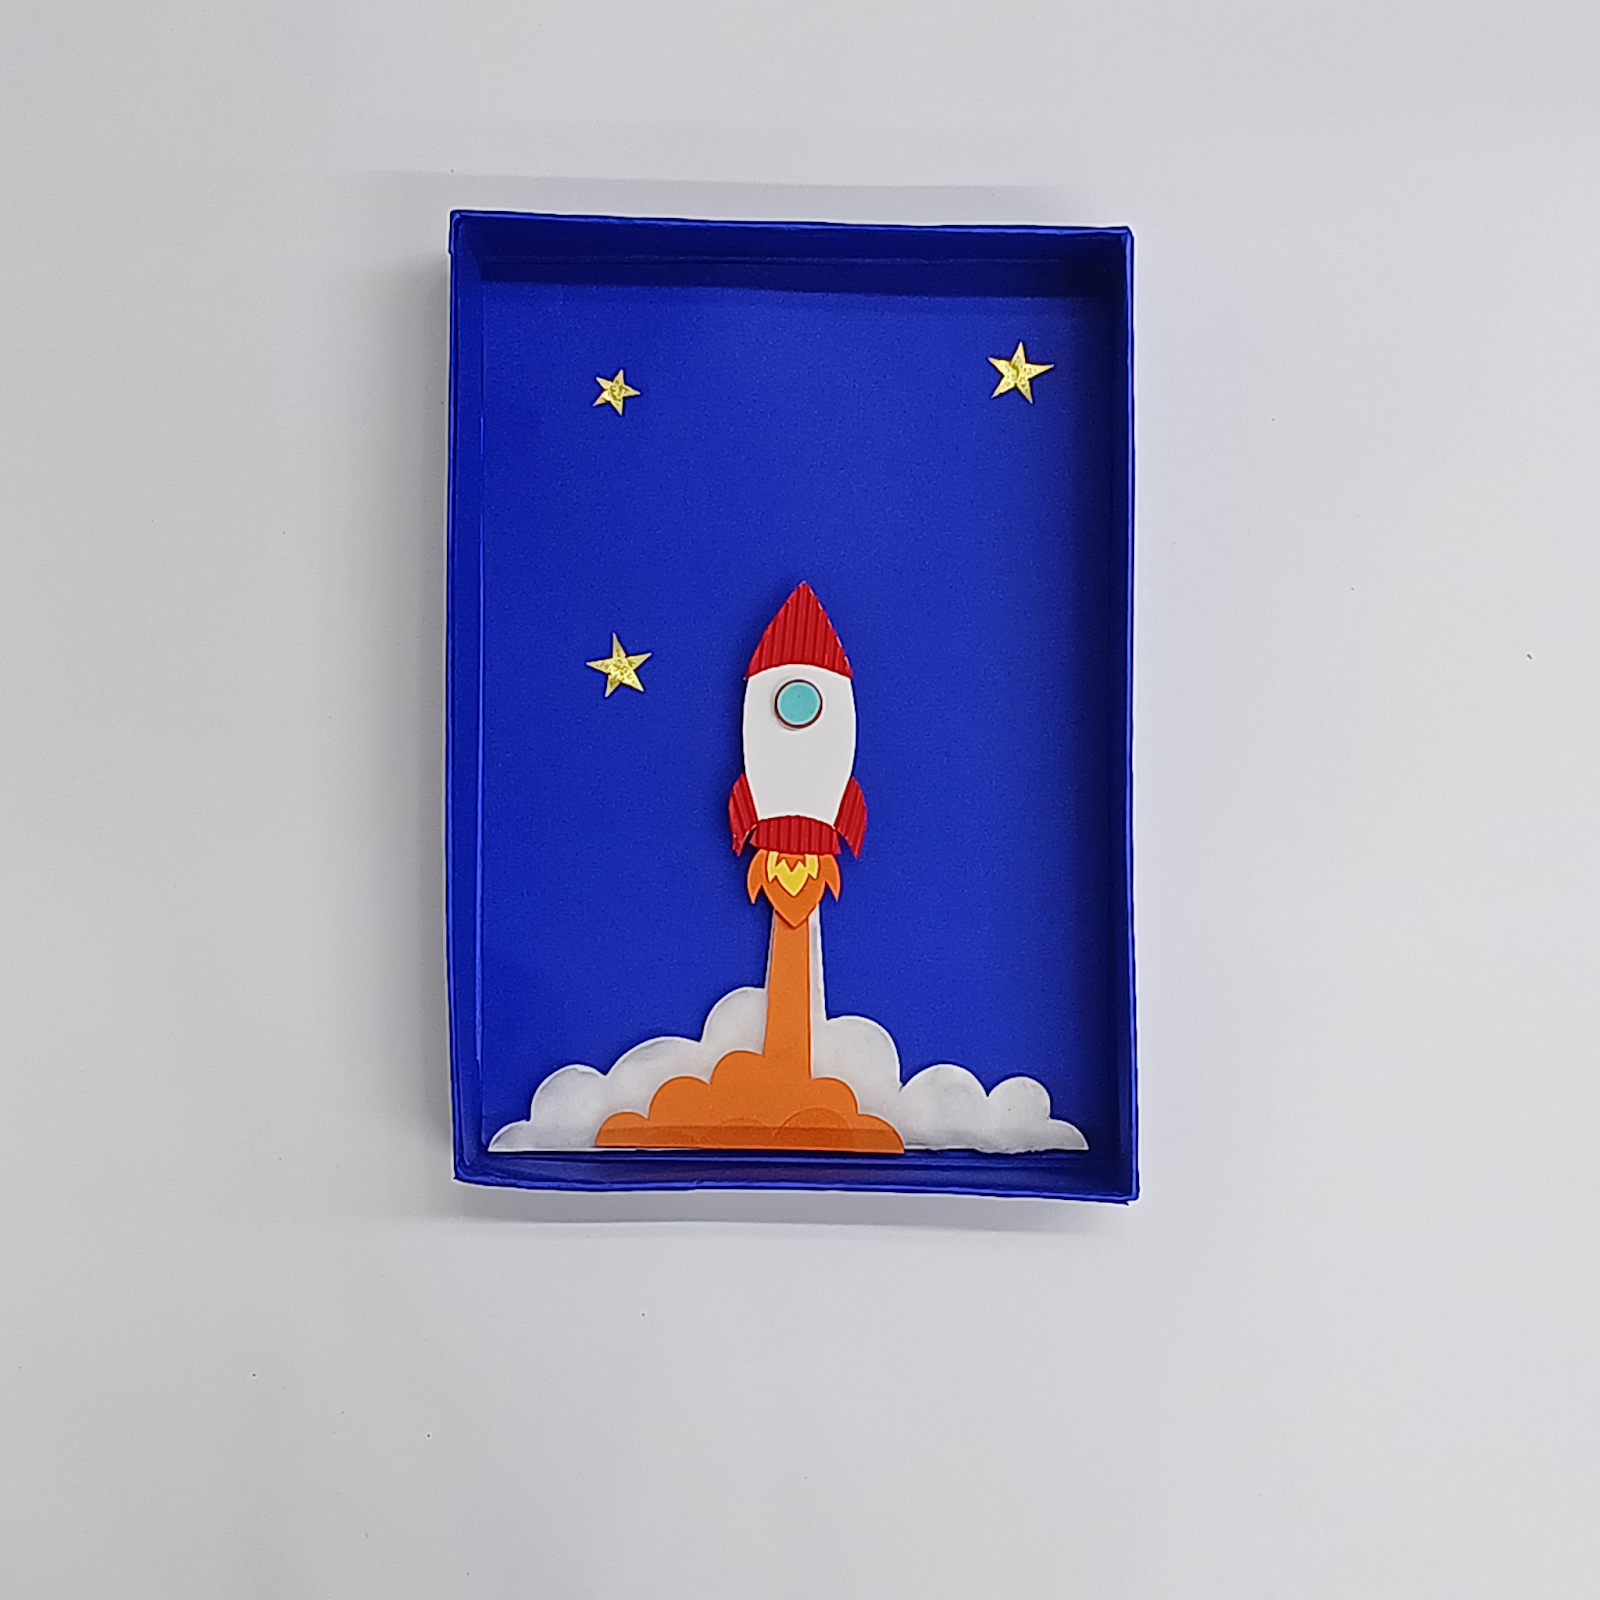 How to Make DIY Space Rocket Paper Craft Activity for Kids